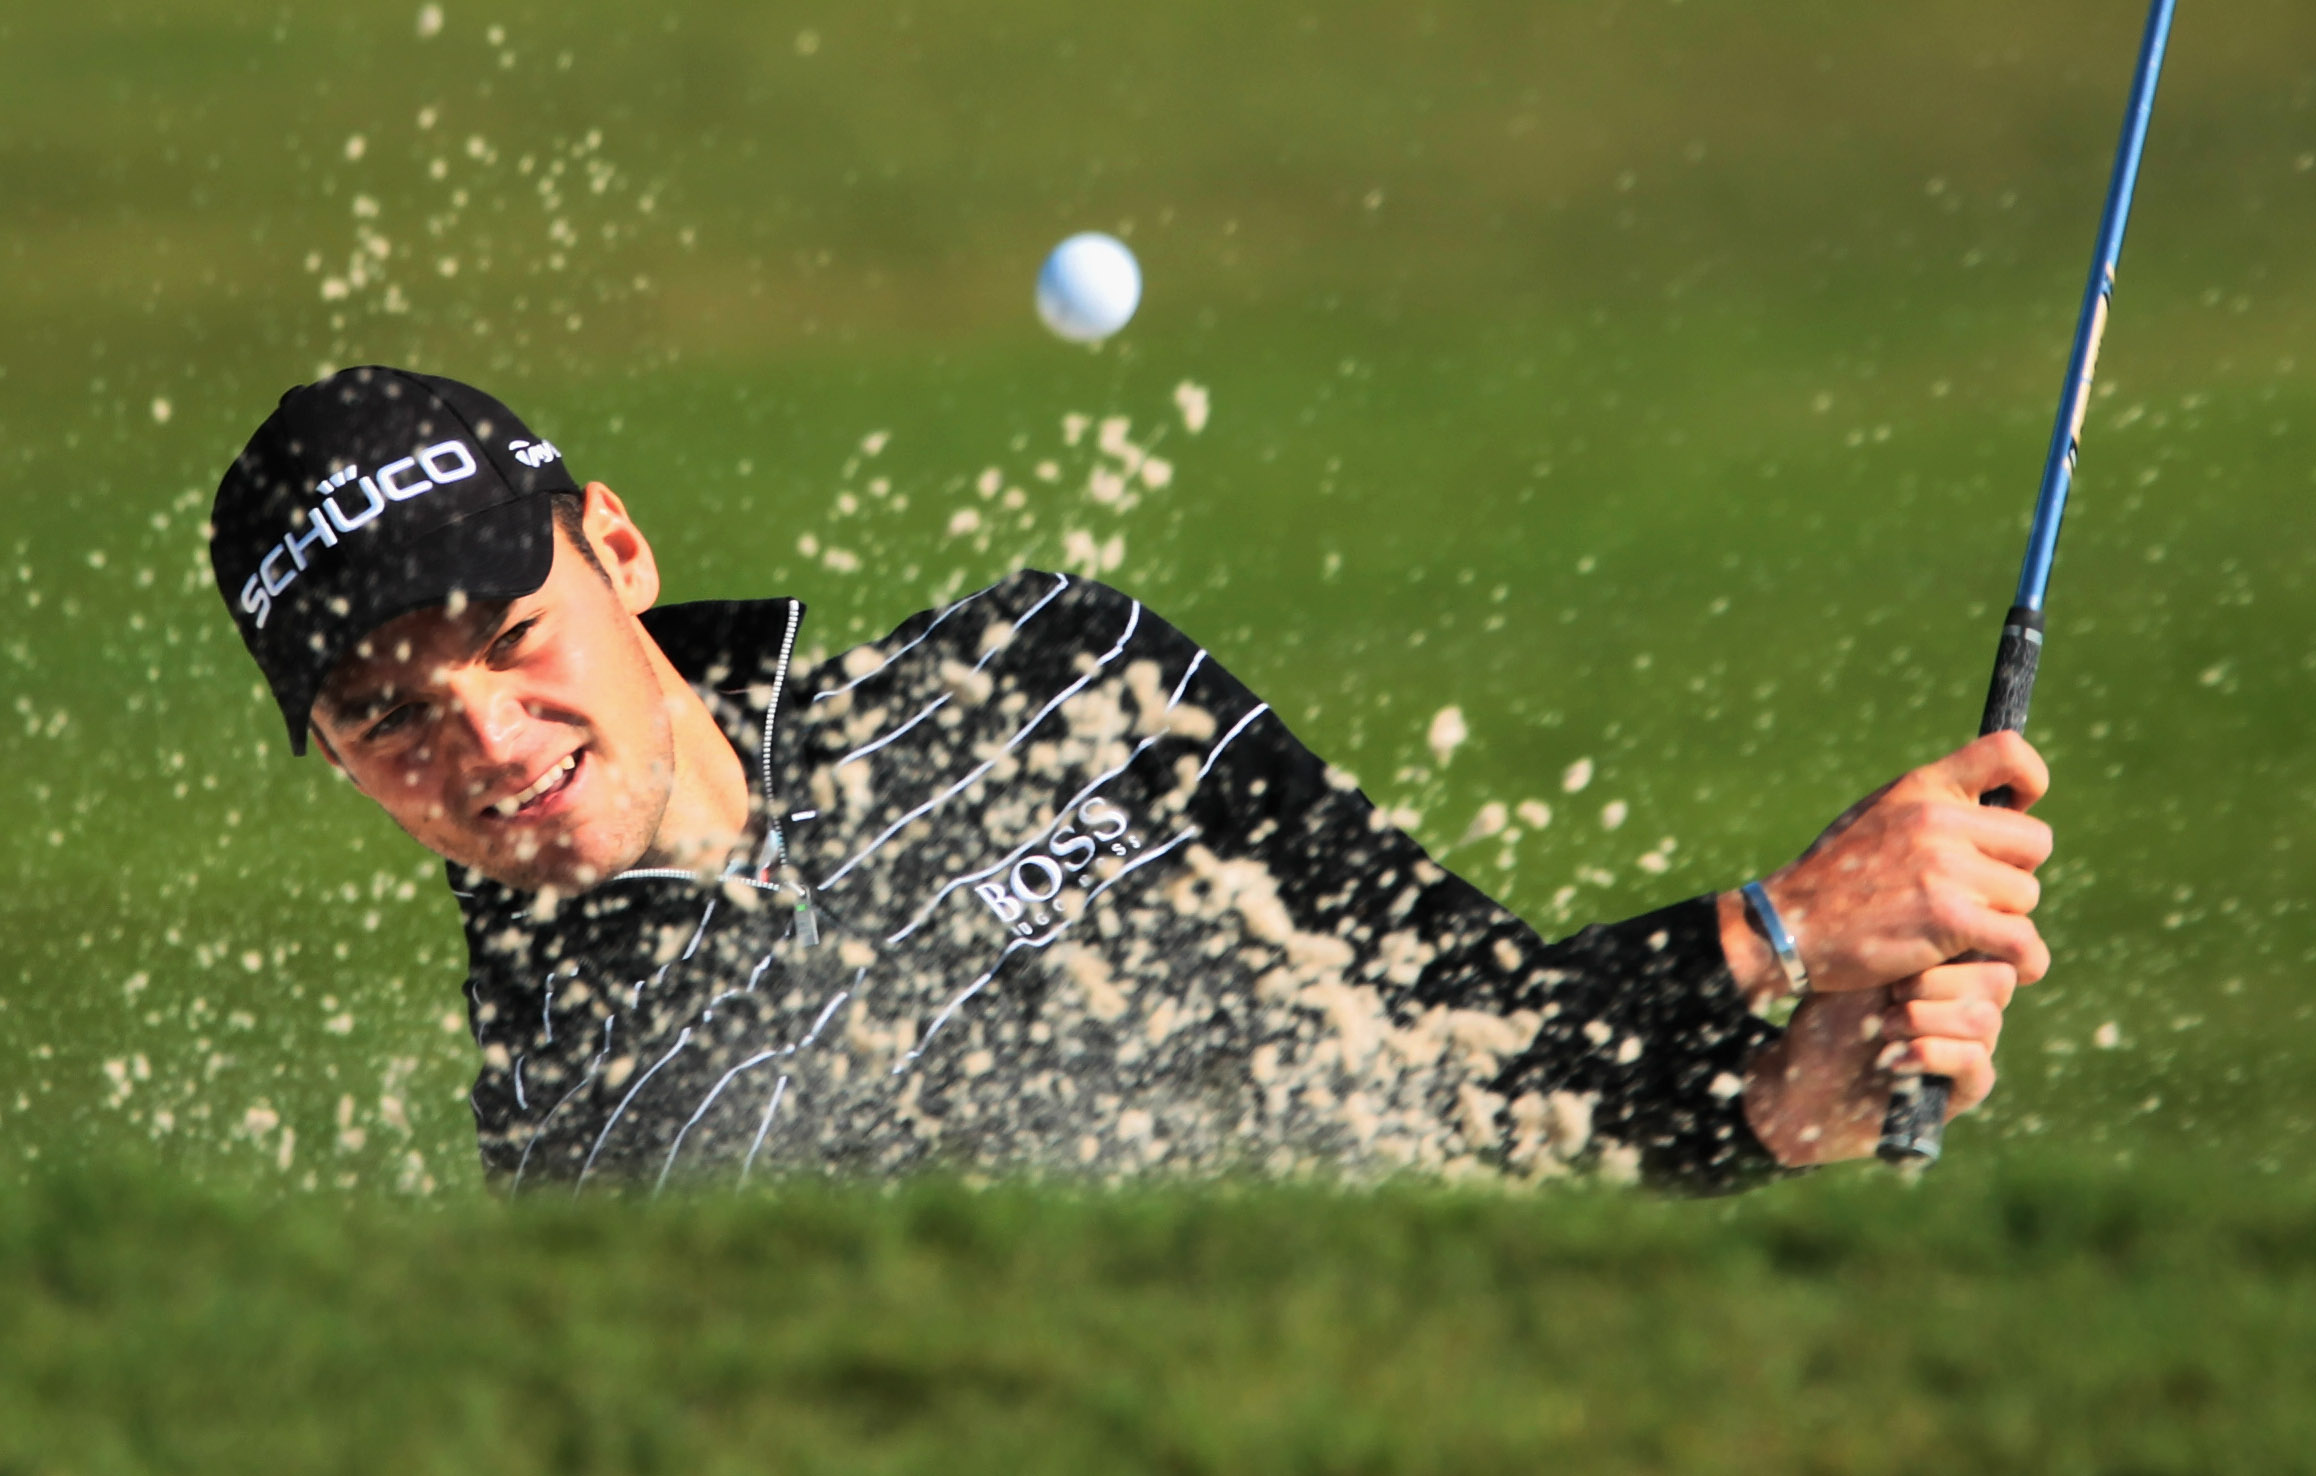 DORAL, FL - MARCH 11:  Martin Kaymer of Germany plays a bunker shot on the 15th hole during the completion of the first round of the 2011 WGC- Cadillac Championship at the TPC Blue Monster at the Doral Golf Resort and Spa on March 11, 2011 in Doral, Flori